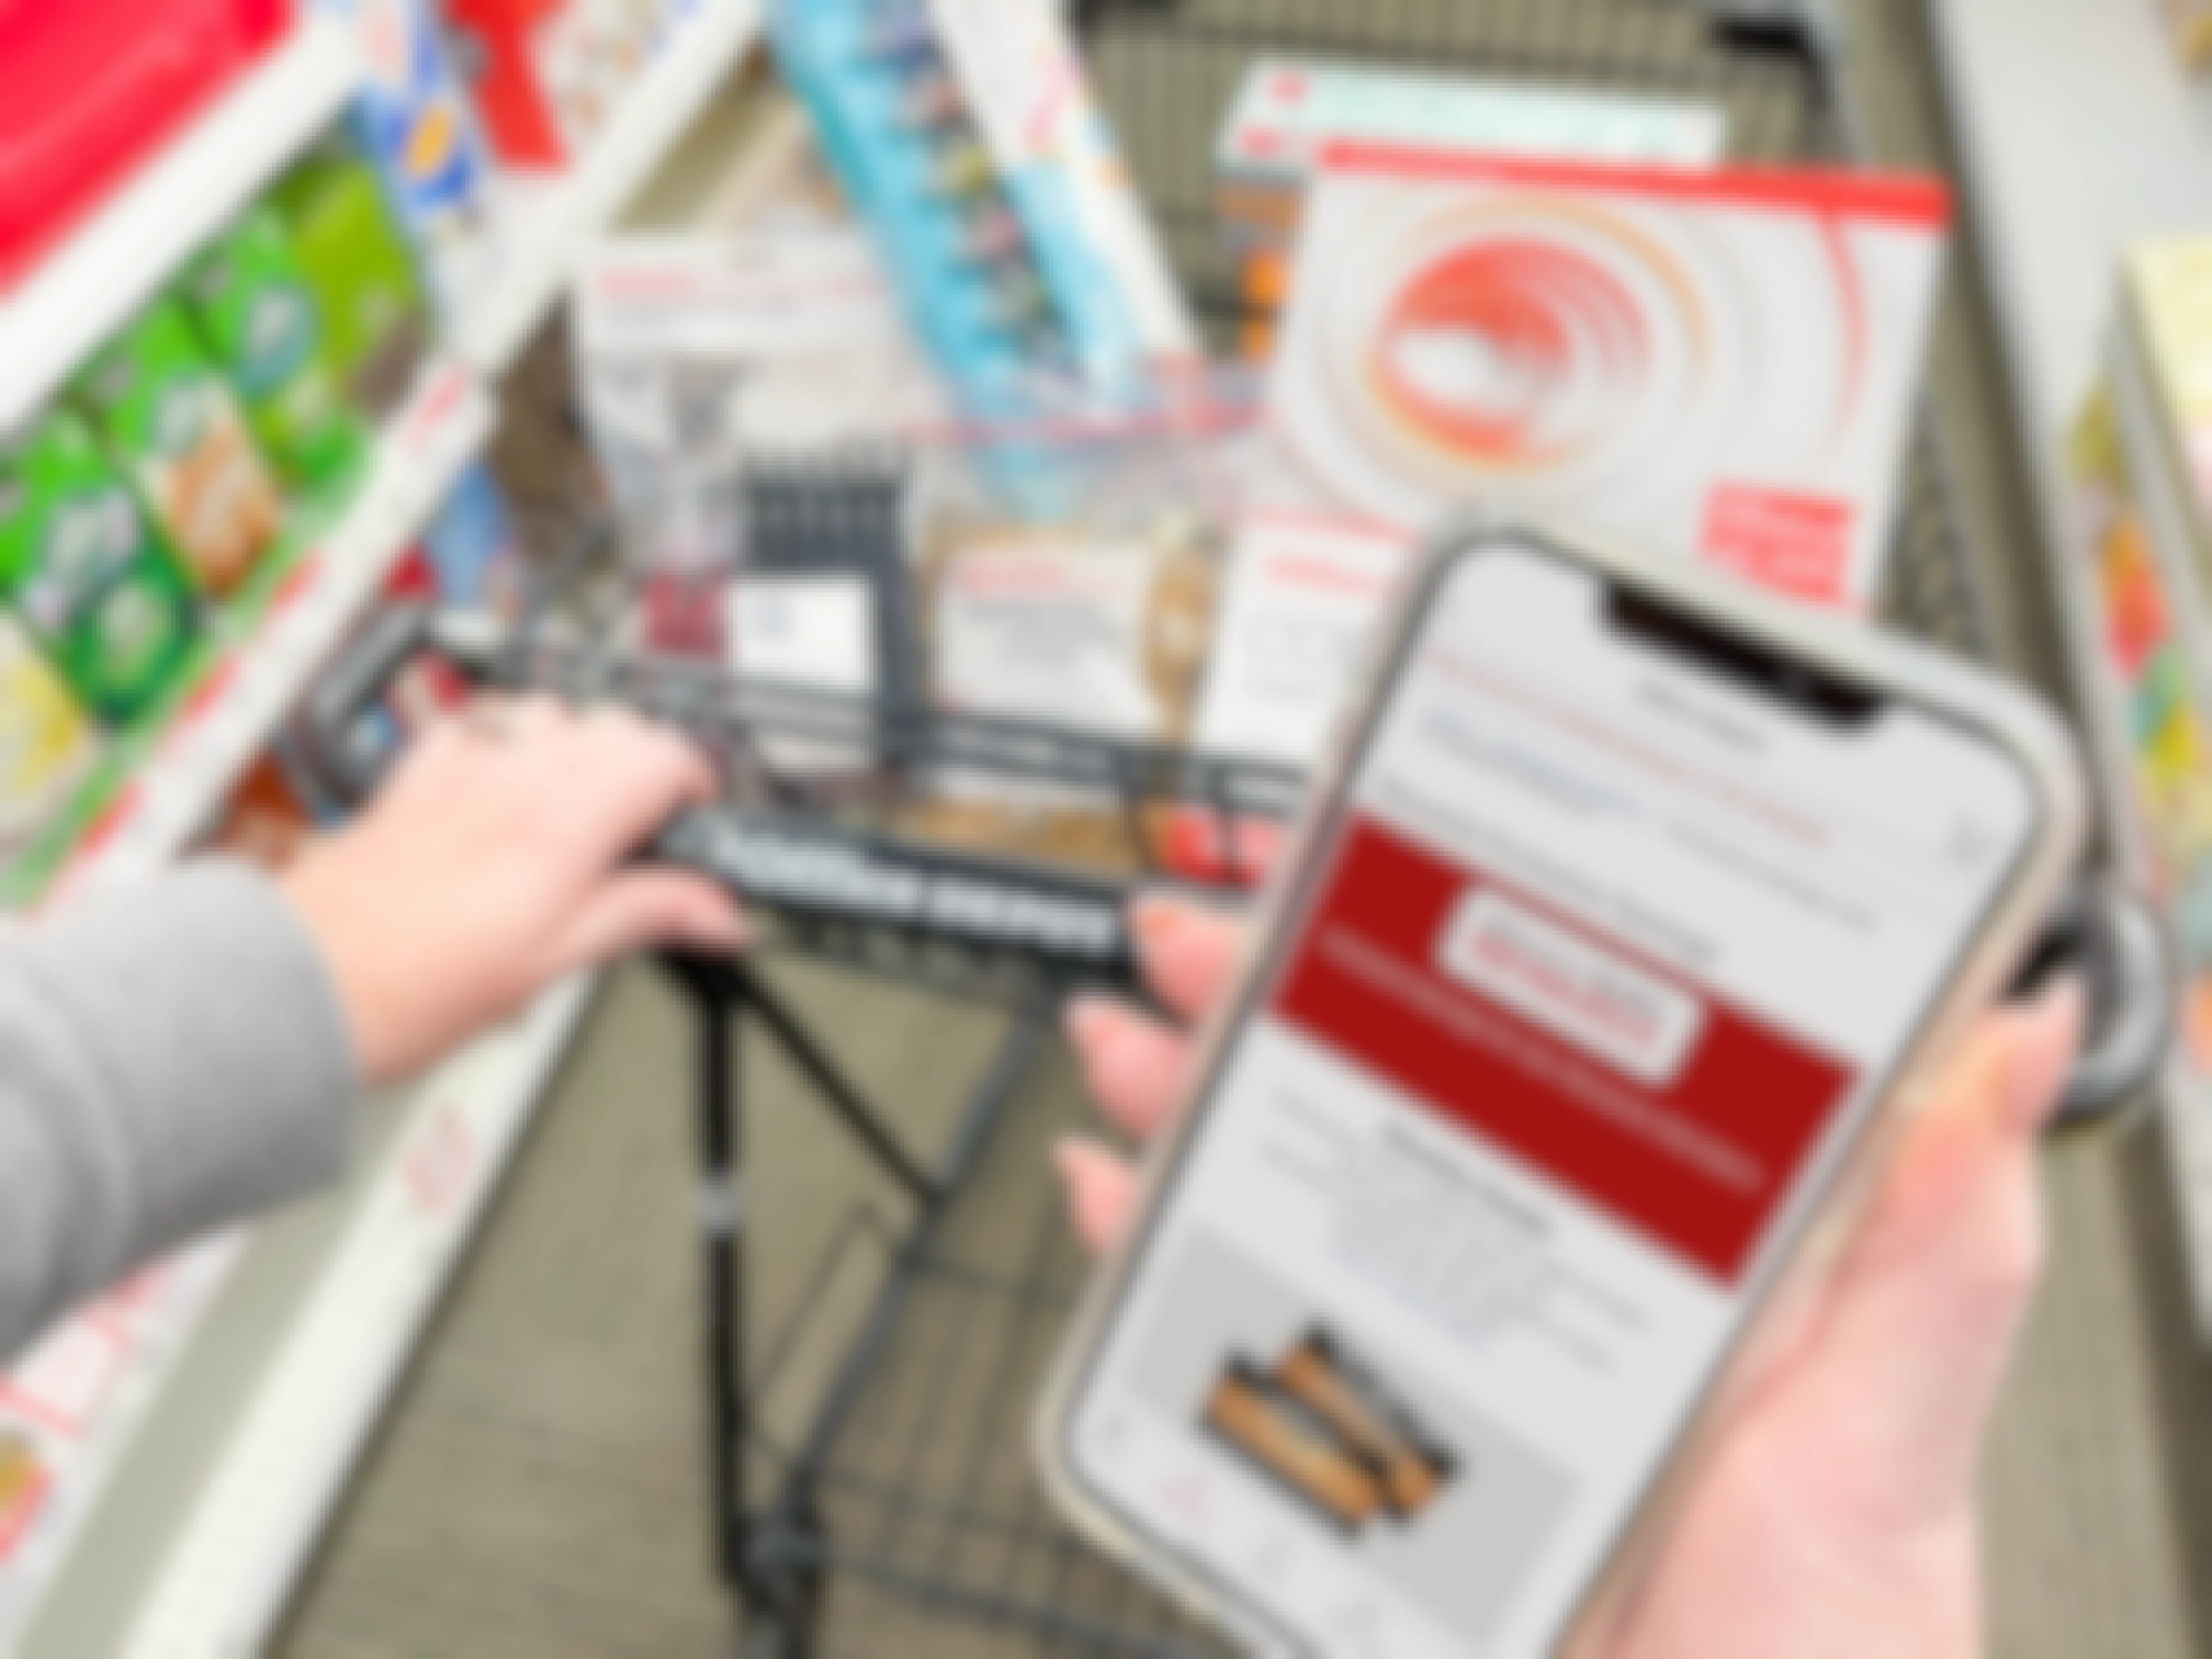 A person's hand holding an iPhone that is displaying the Office Depot mobile app's Rewards page. In the background, the person's other hand is pushing an Office Depot shopping cart full of office supplies down an aisle at Office Depot.